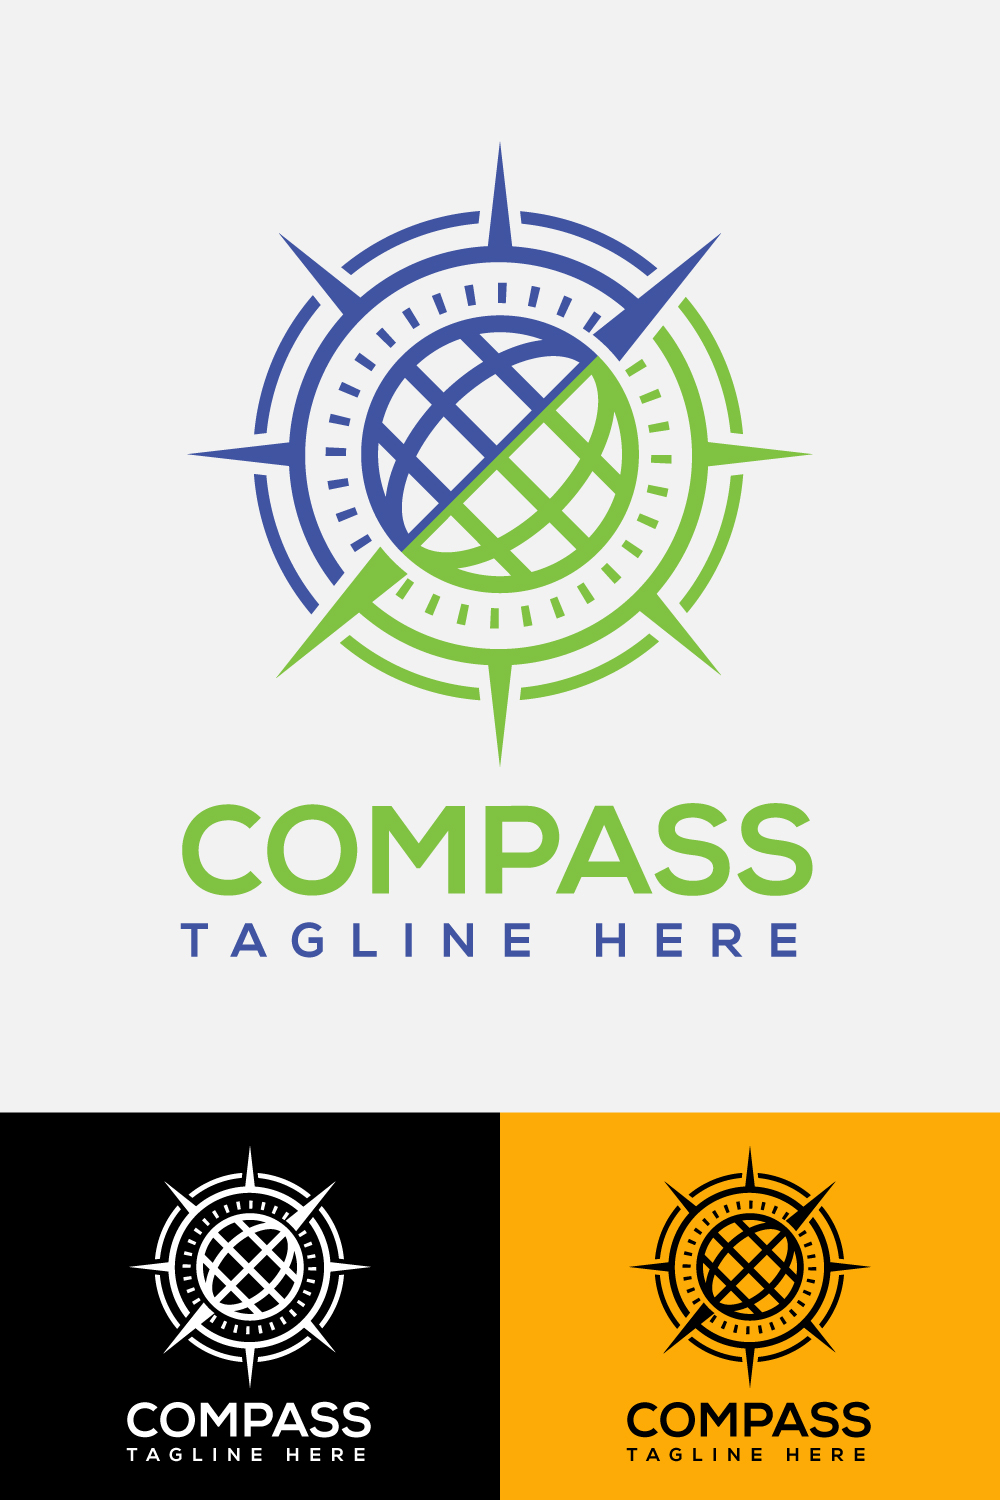 Collection of images of exquisite round logos, in the form of a compass.